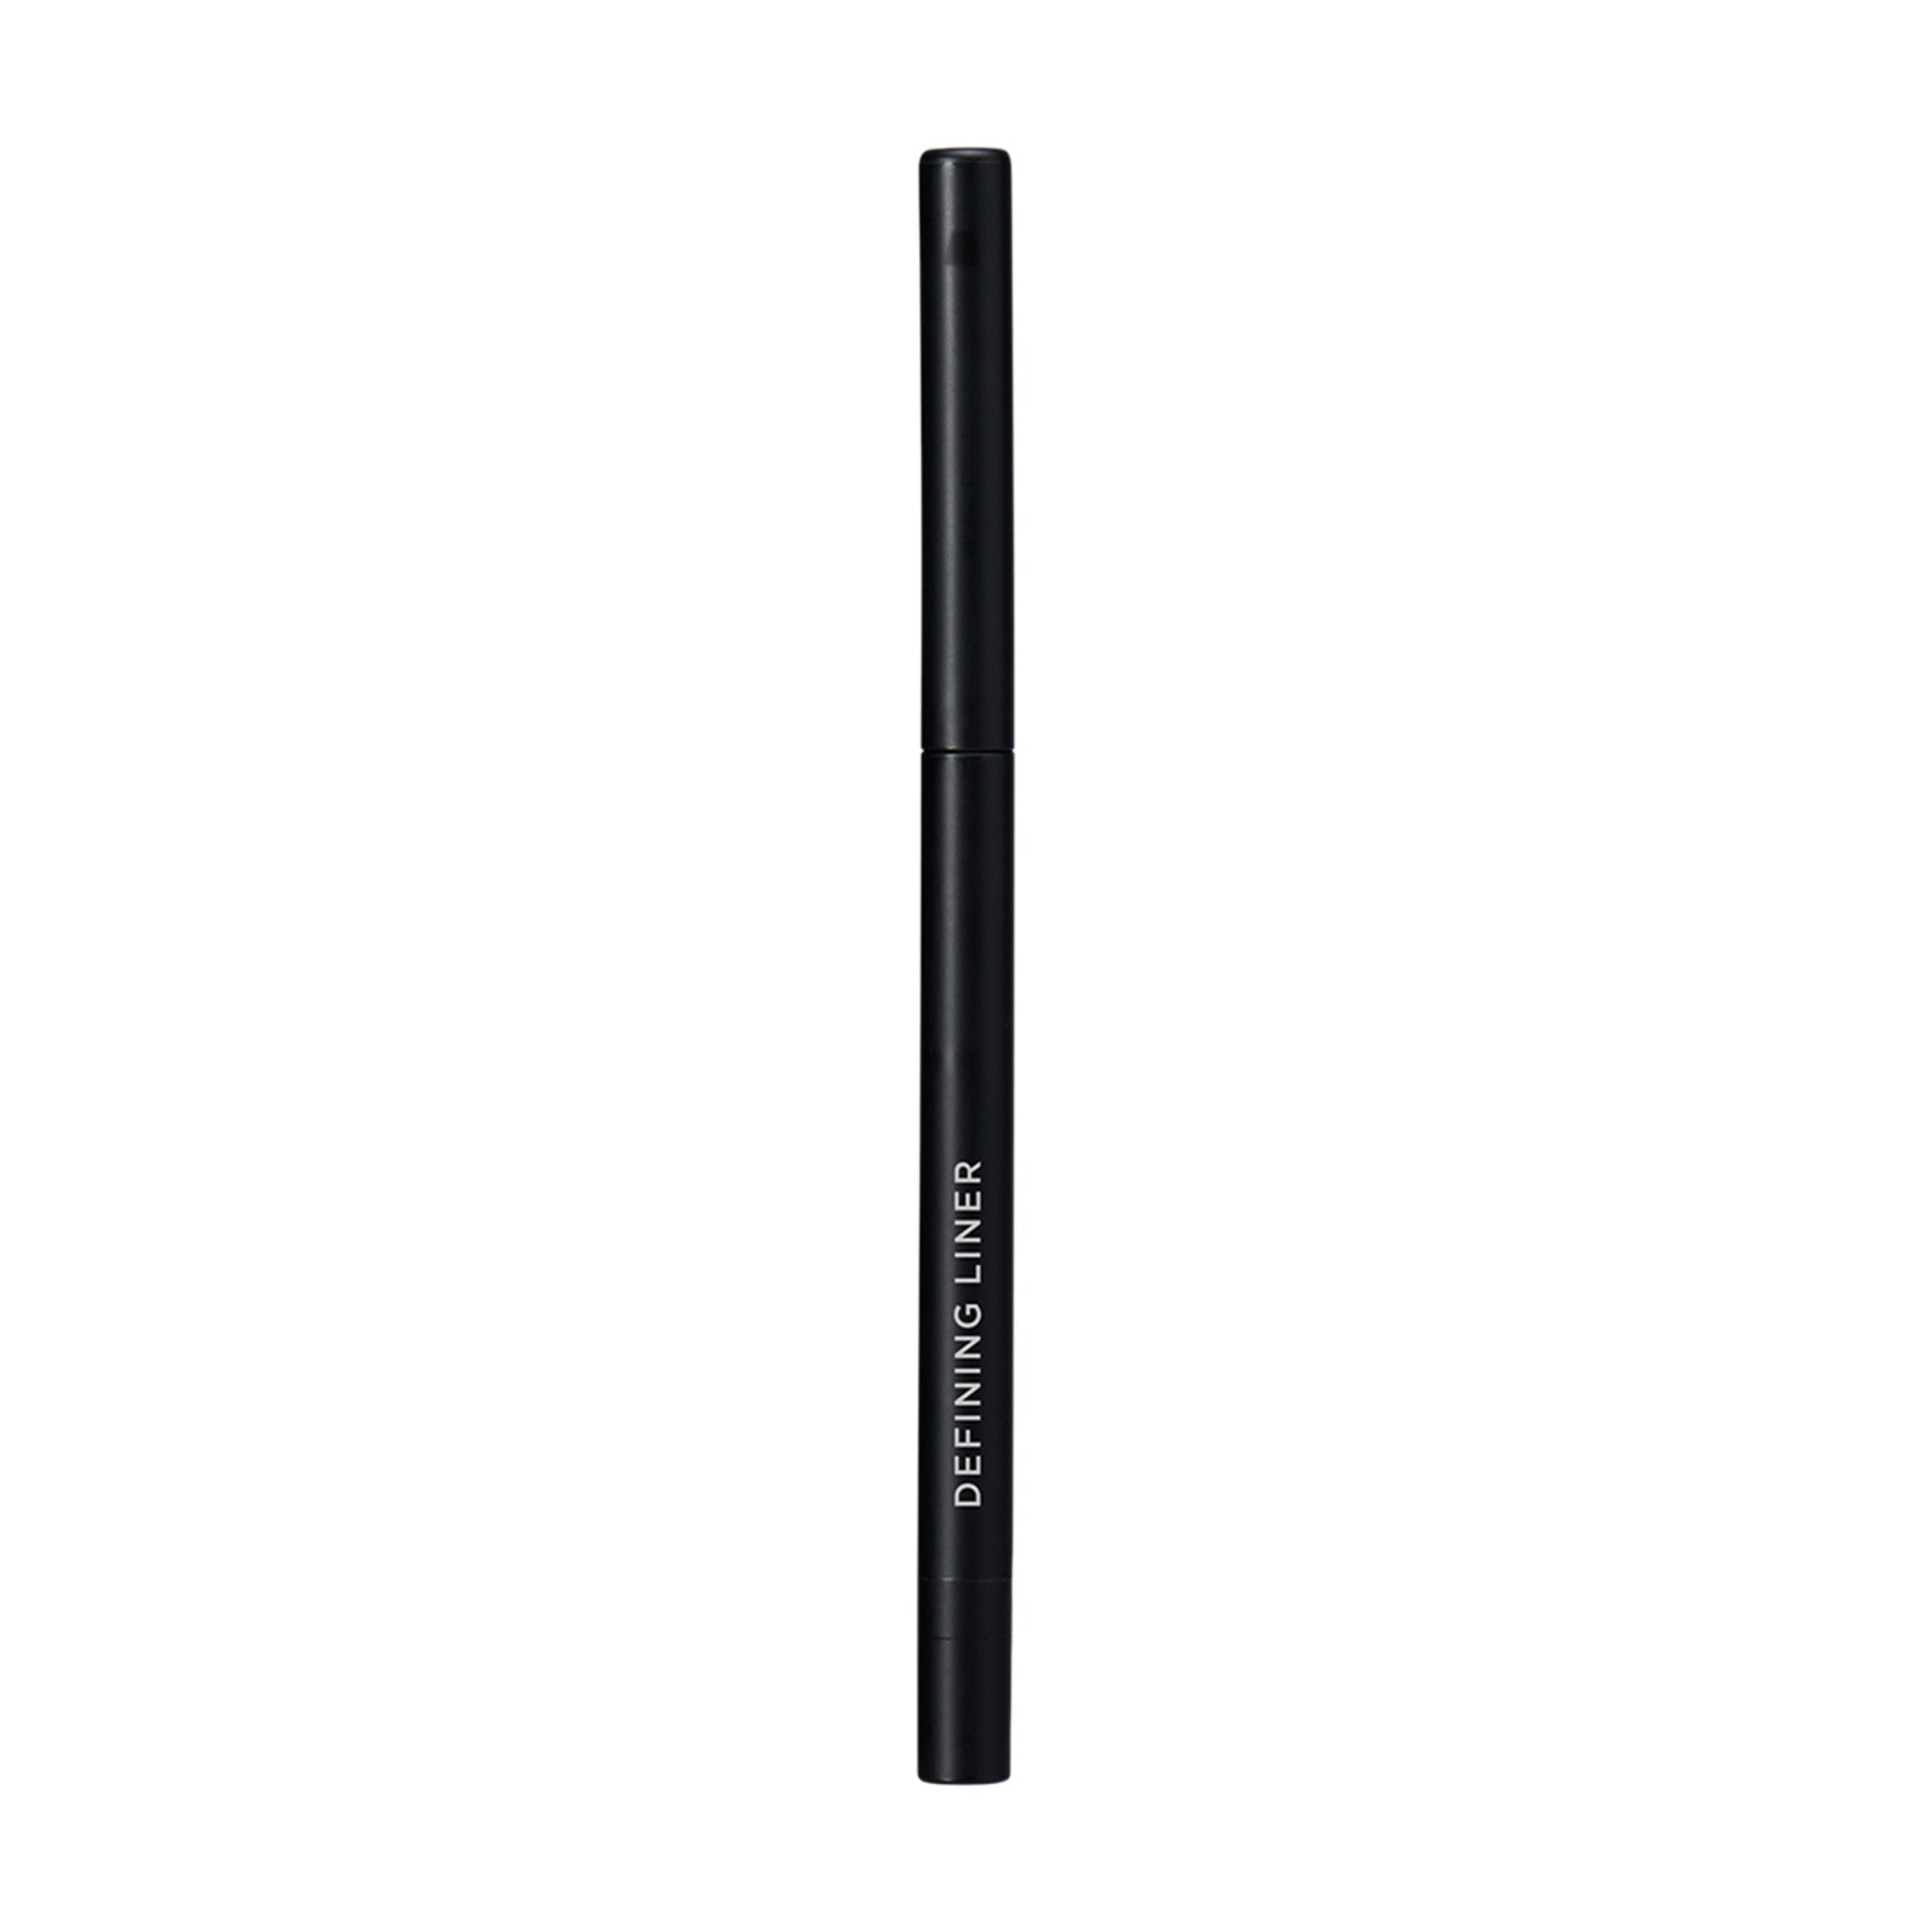 RevitaLash Defining Liner Color/Shade variant: Black main image. This product is in the color black